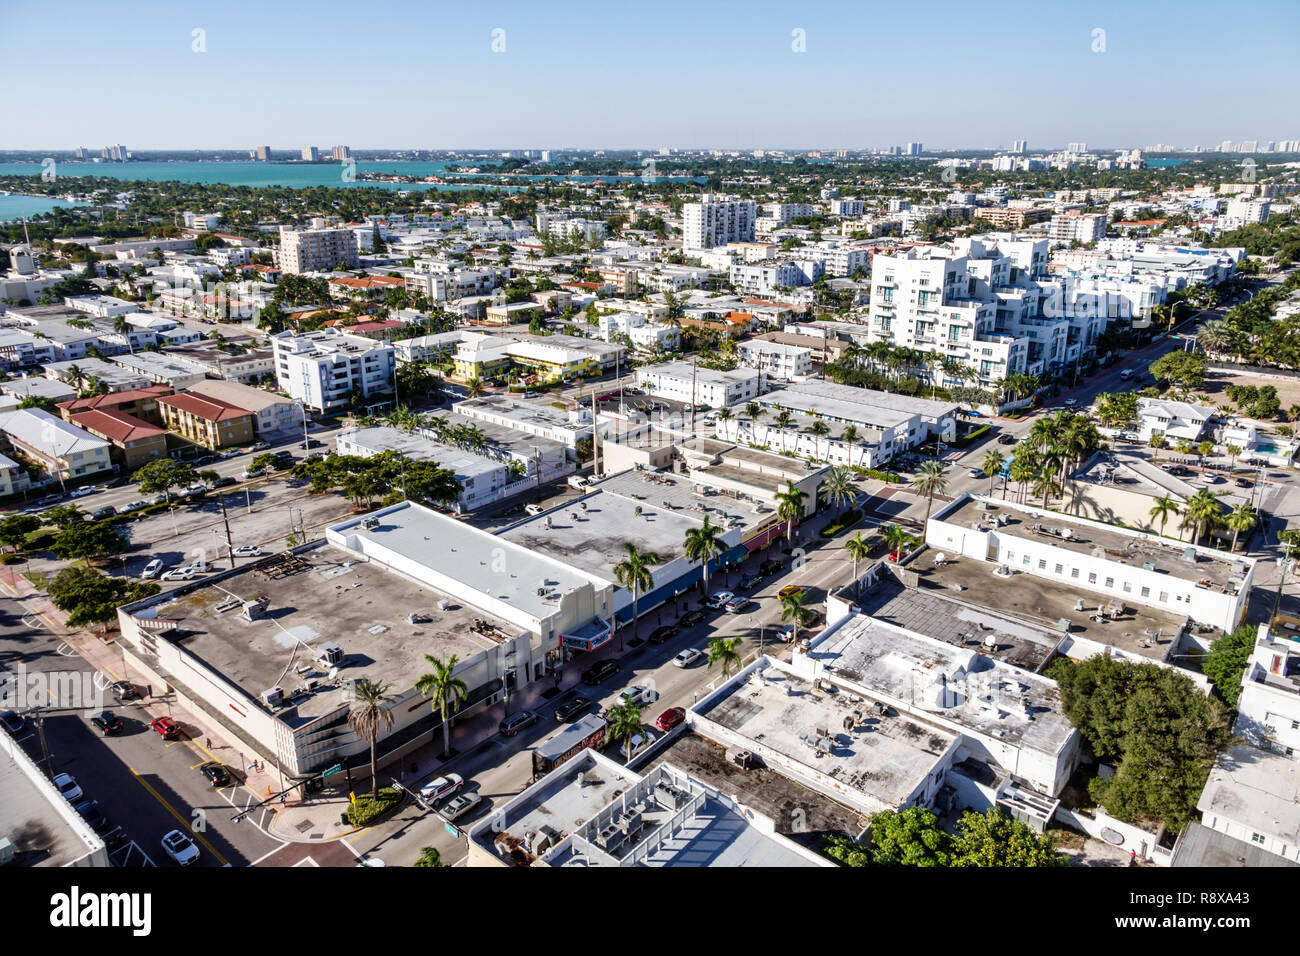 Miami Beach Florida,North Beach,aerial overhead view,flat roof buildings businesses residences,Biscayne Bay,FL181205135 Stock Photo